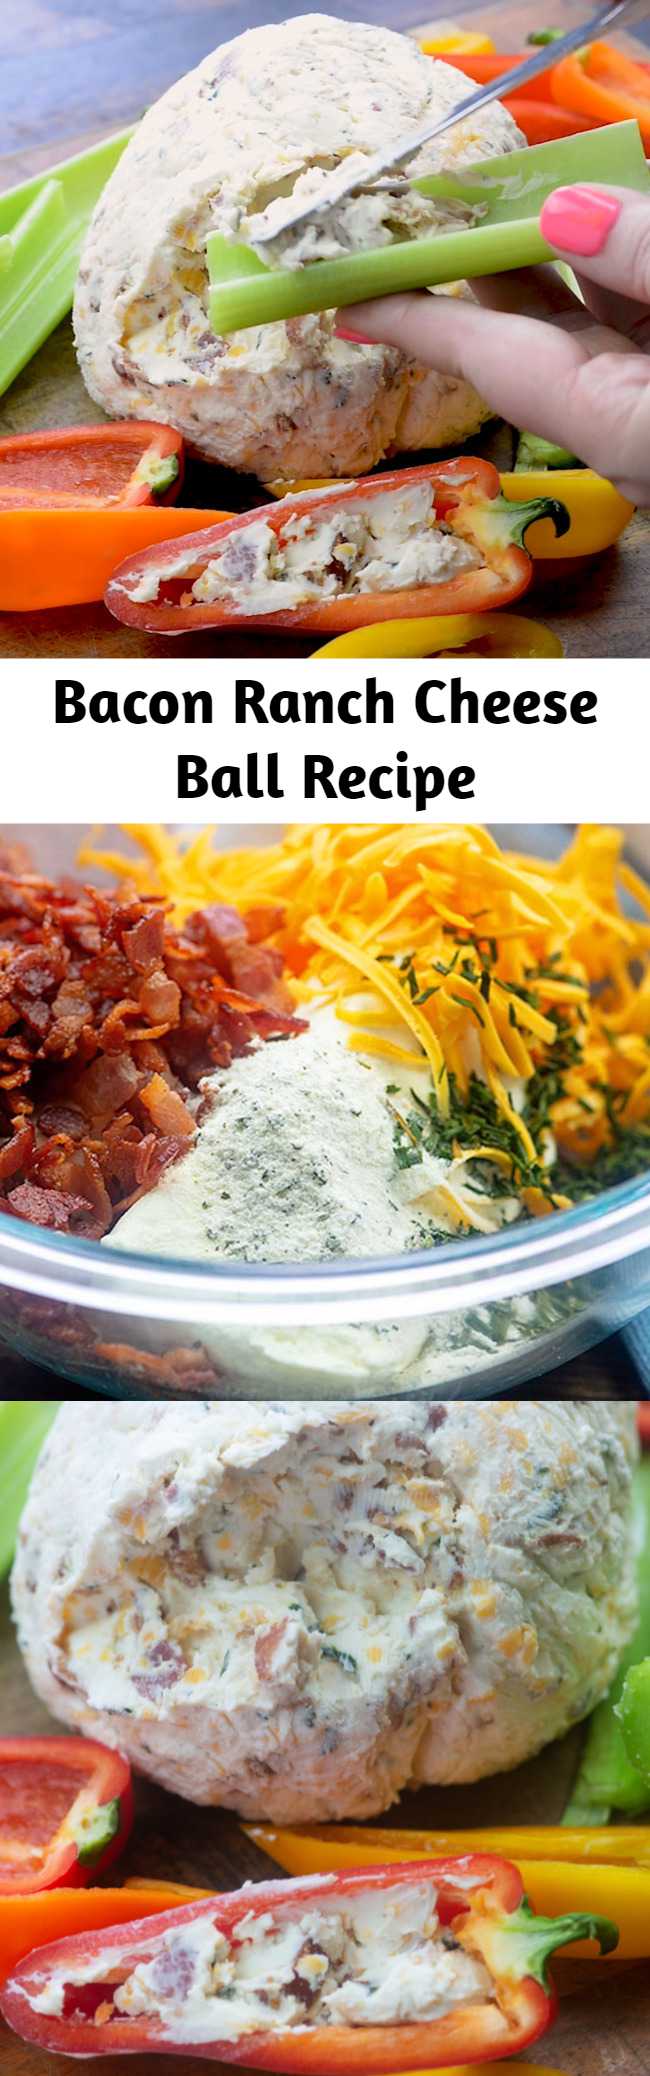 Bacon Ranch Cheese Ball Recipe - This bacon ranch cheese ball is perfect for serving friends and family! Add crackers for the carb lovers and serve it up with celery and sweet peppers for the low carb people! #lowcarb #keto #cheeseball #snack